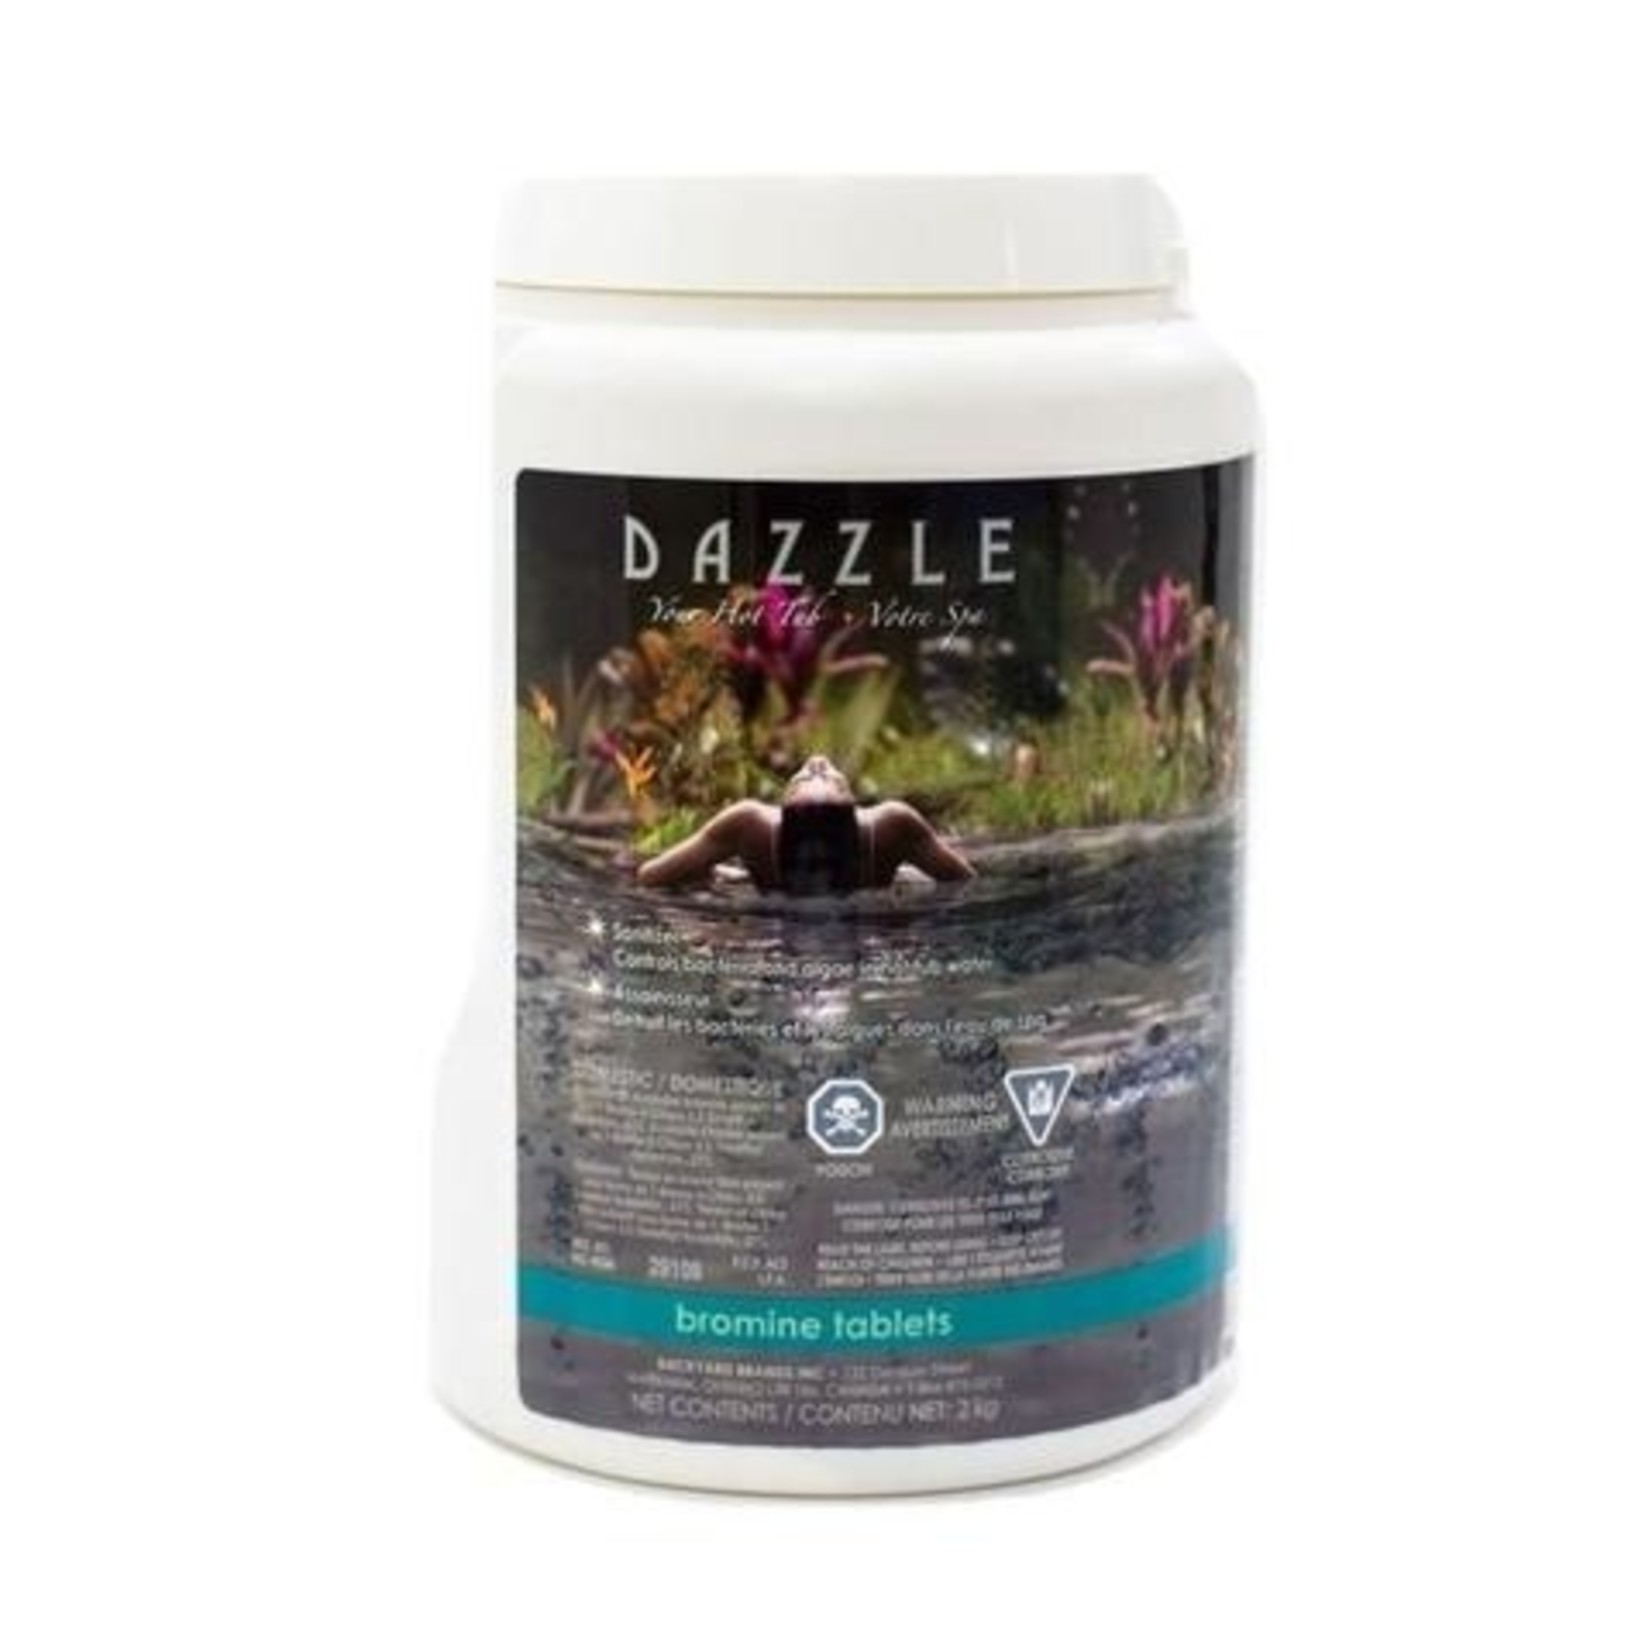 Dazzle Hot Tub Bromine Tablets 2kg 